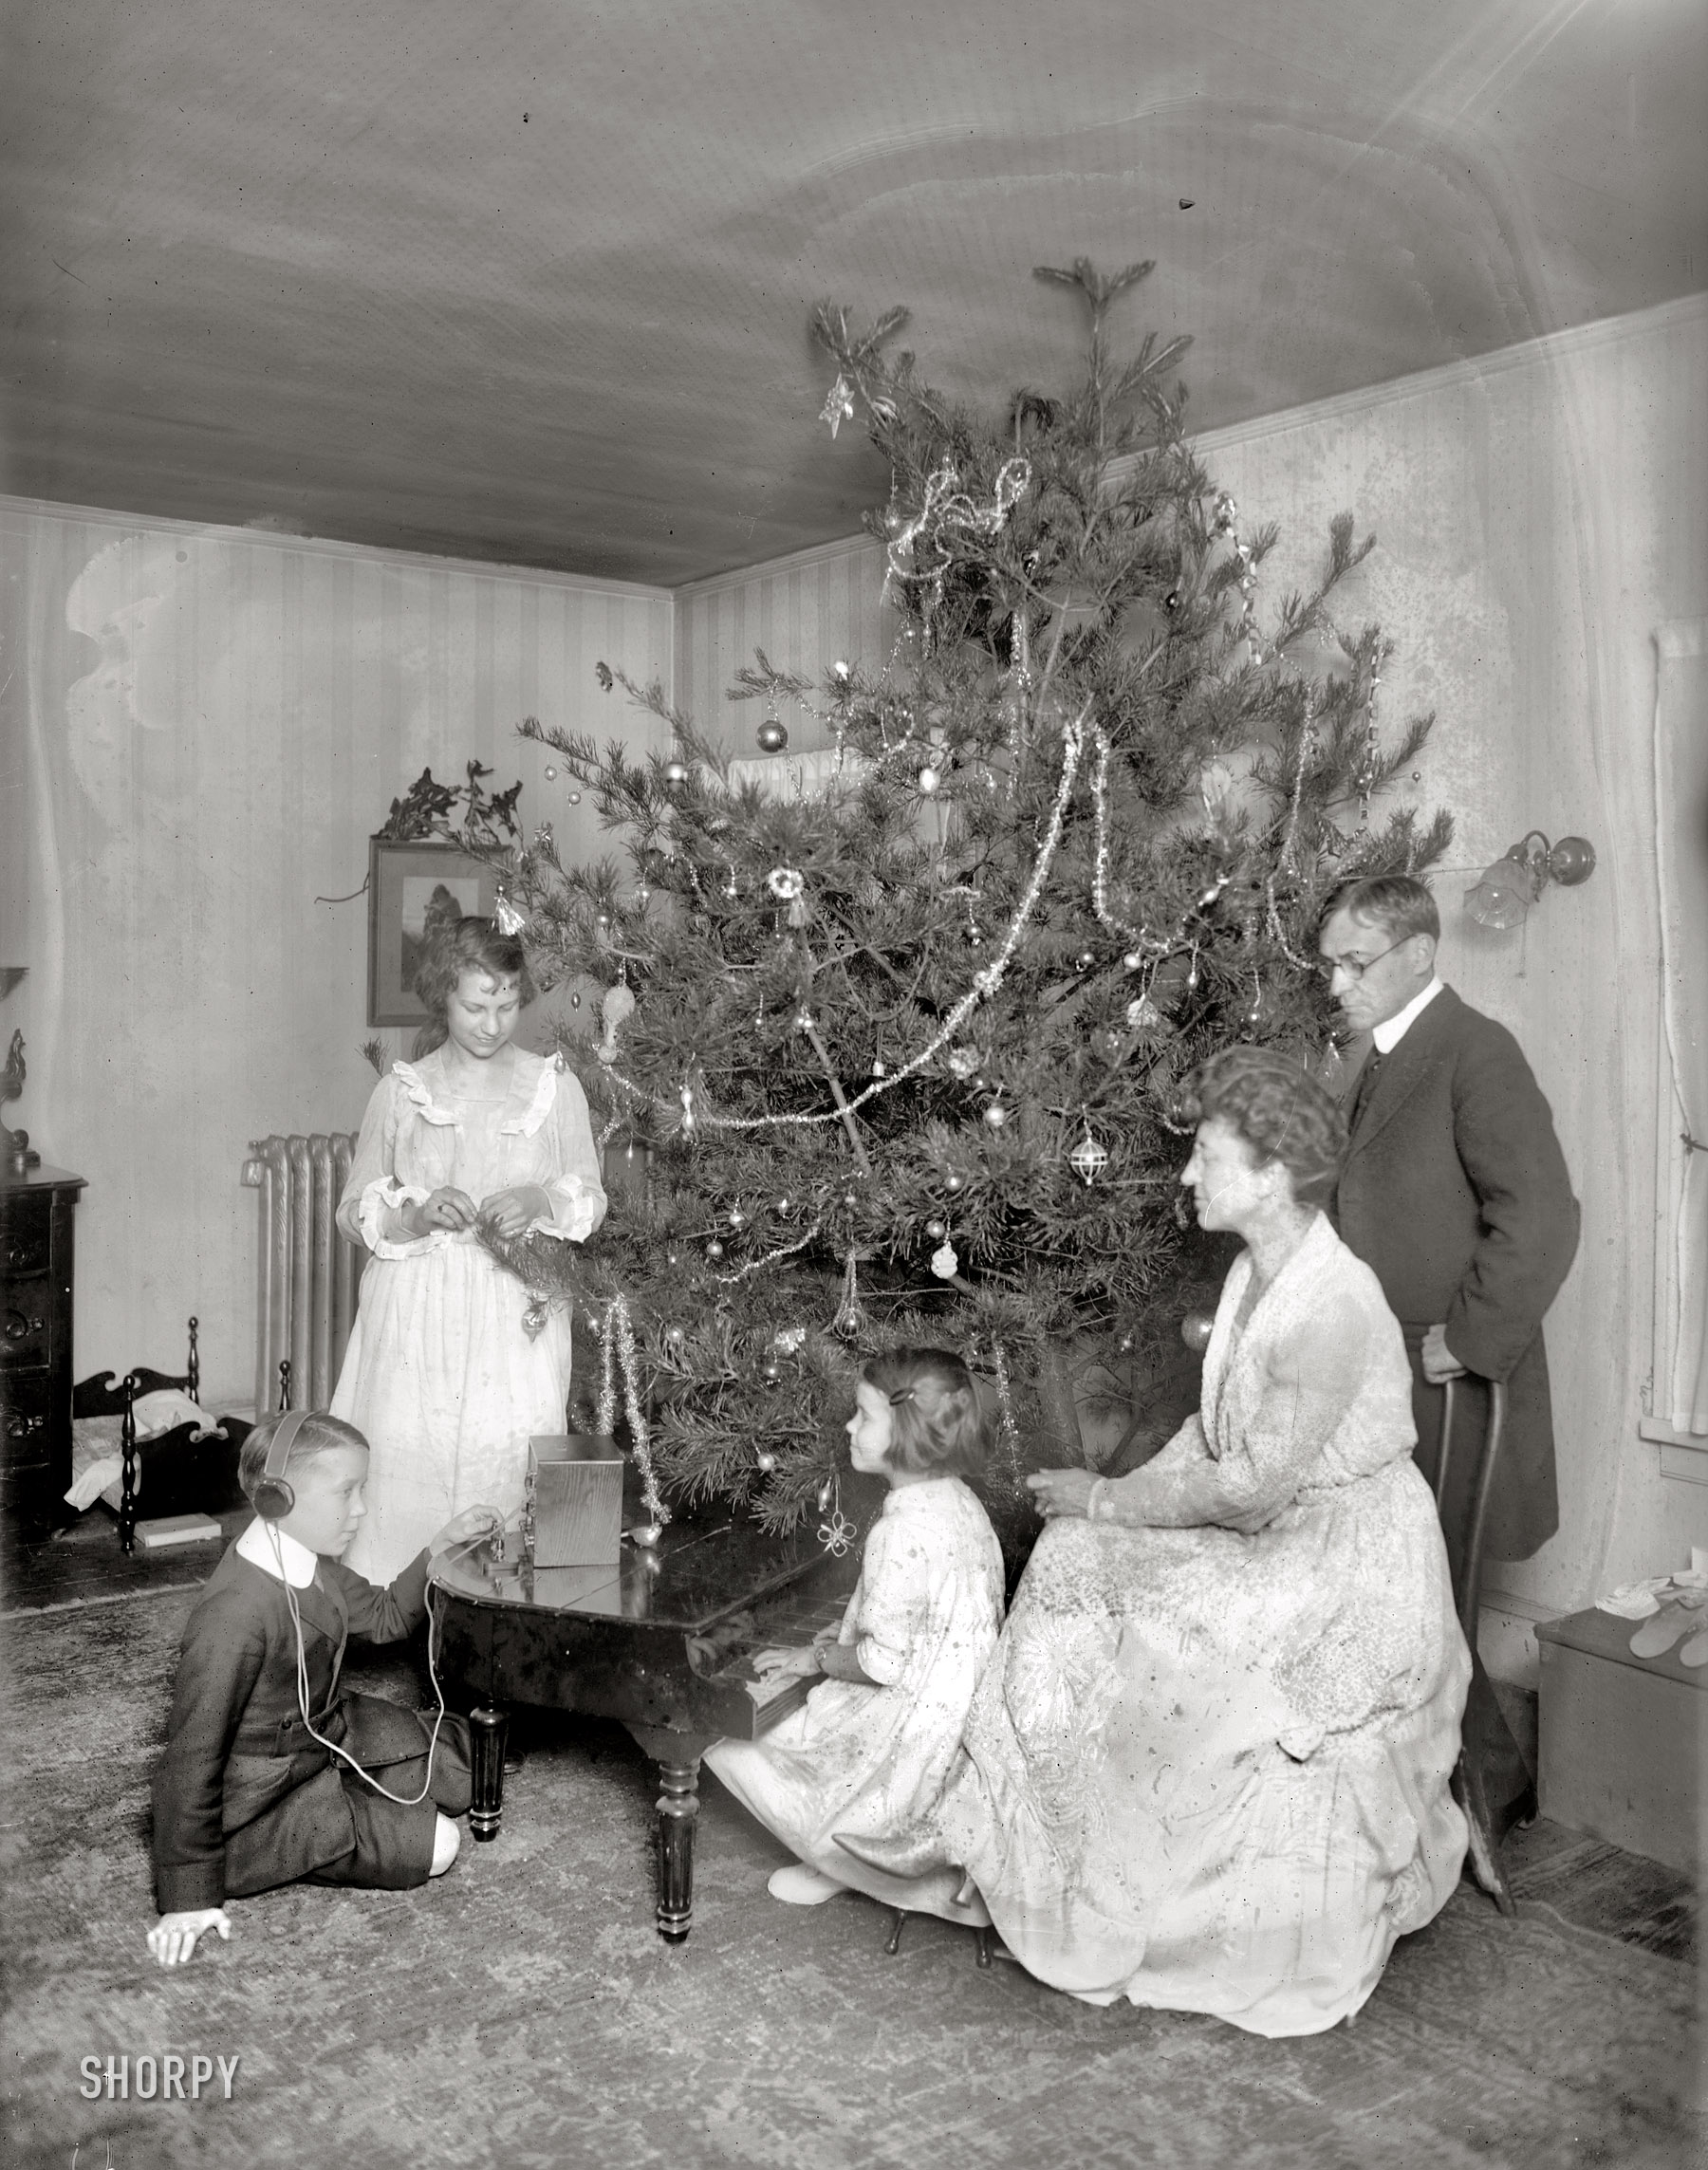 December 1919. "Baker Christmas tree." Secretary of War Newton Baker, wife Elizabeth and children Jack, Betty and little Peggy. National Photo Company Collection glass negative. View full size. More Xmas awesomeness here.